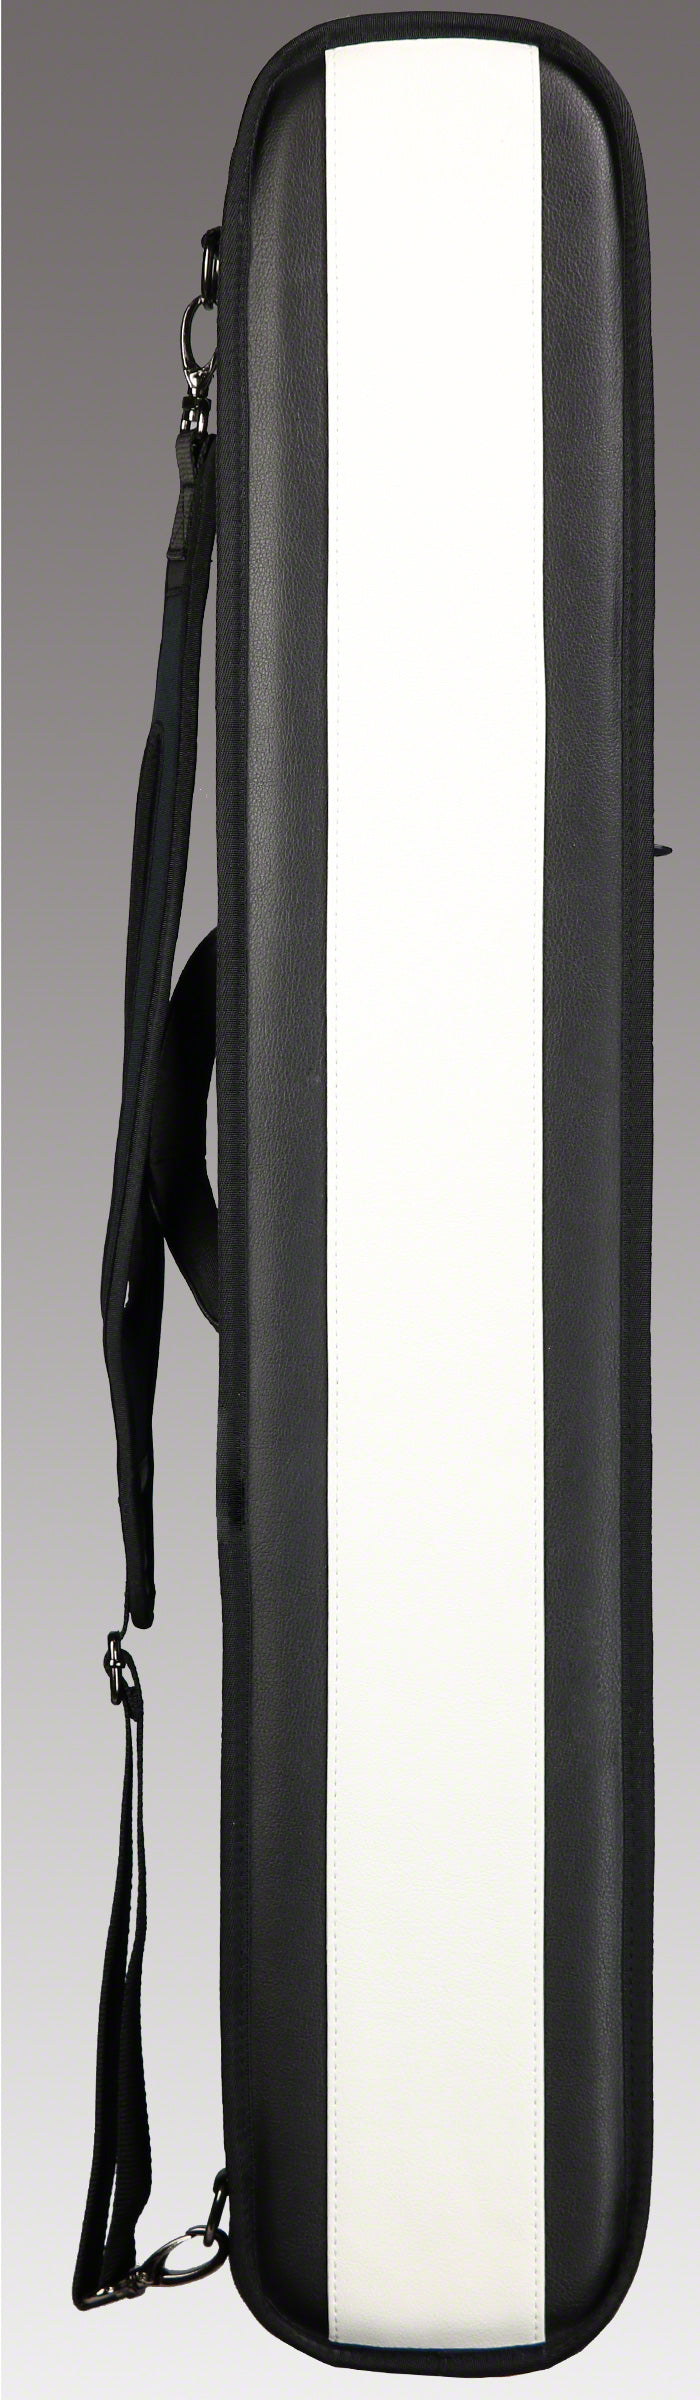 Lucasi Black and White 4x8 Soft Cue Case